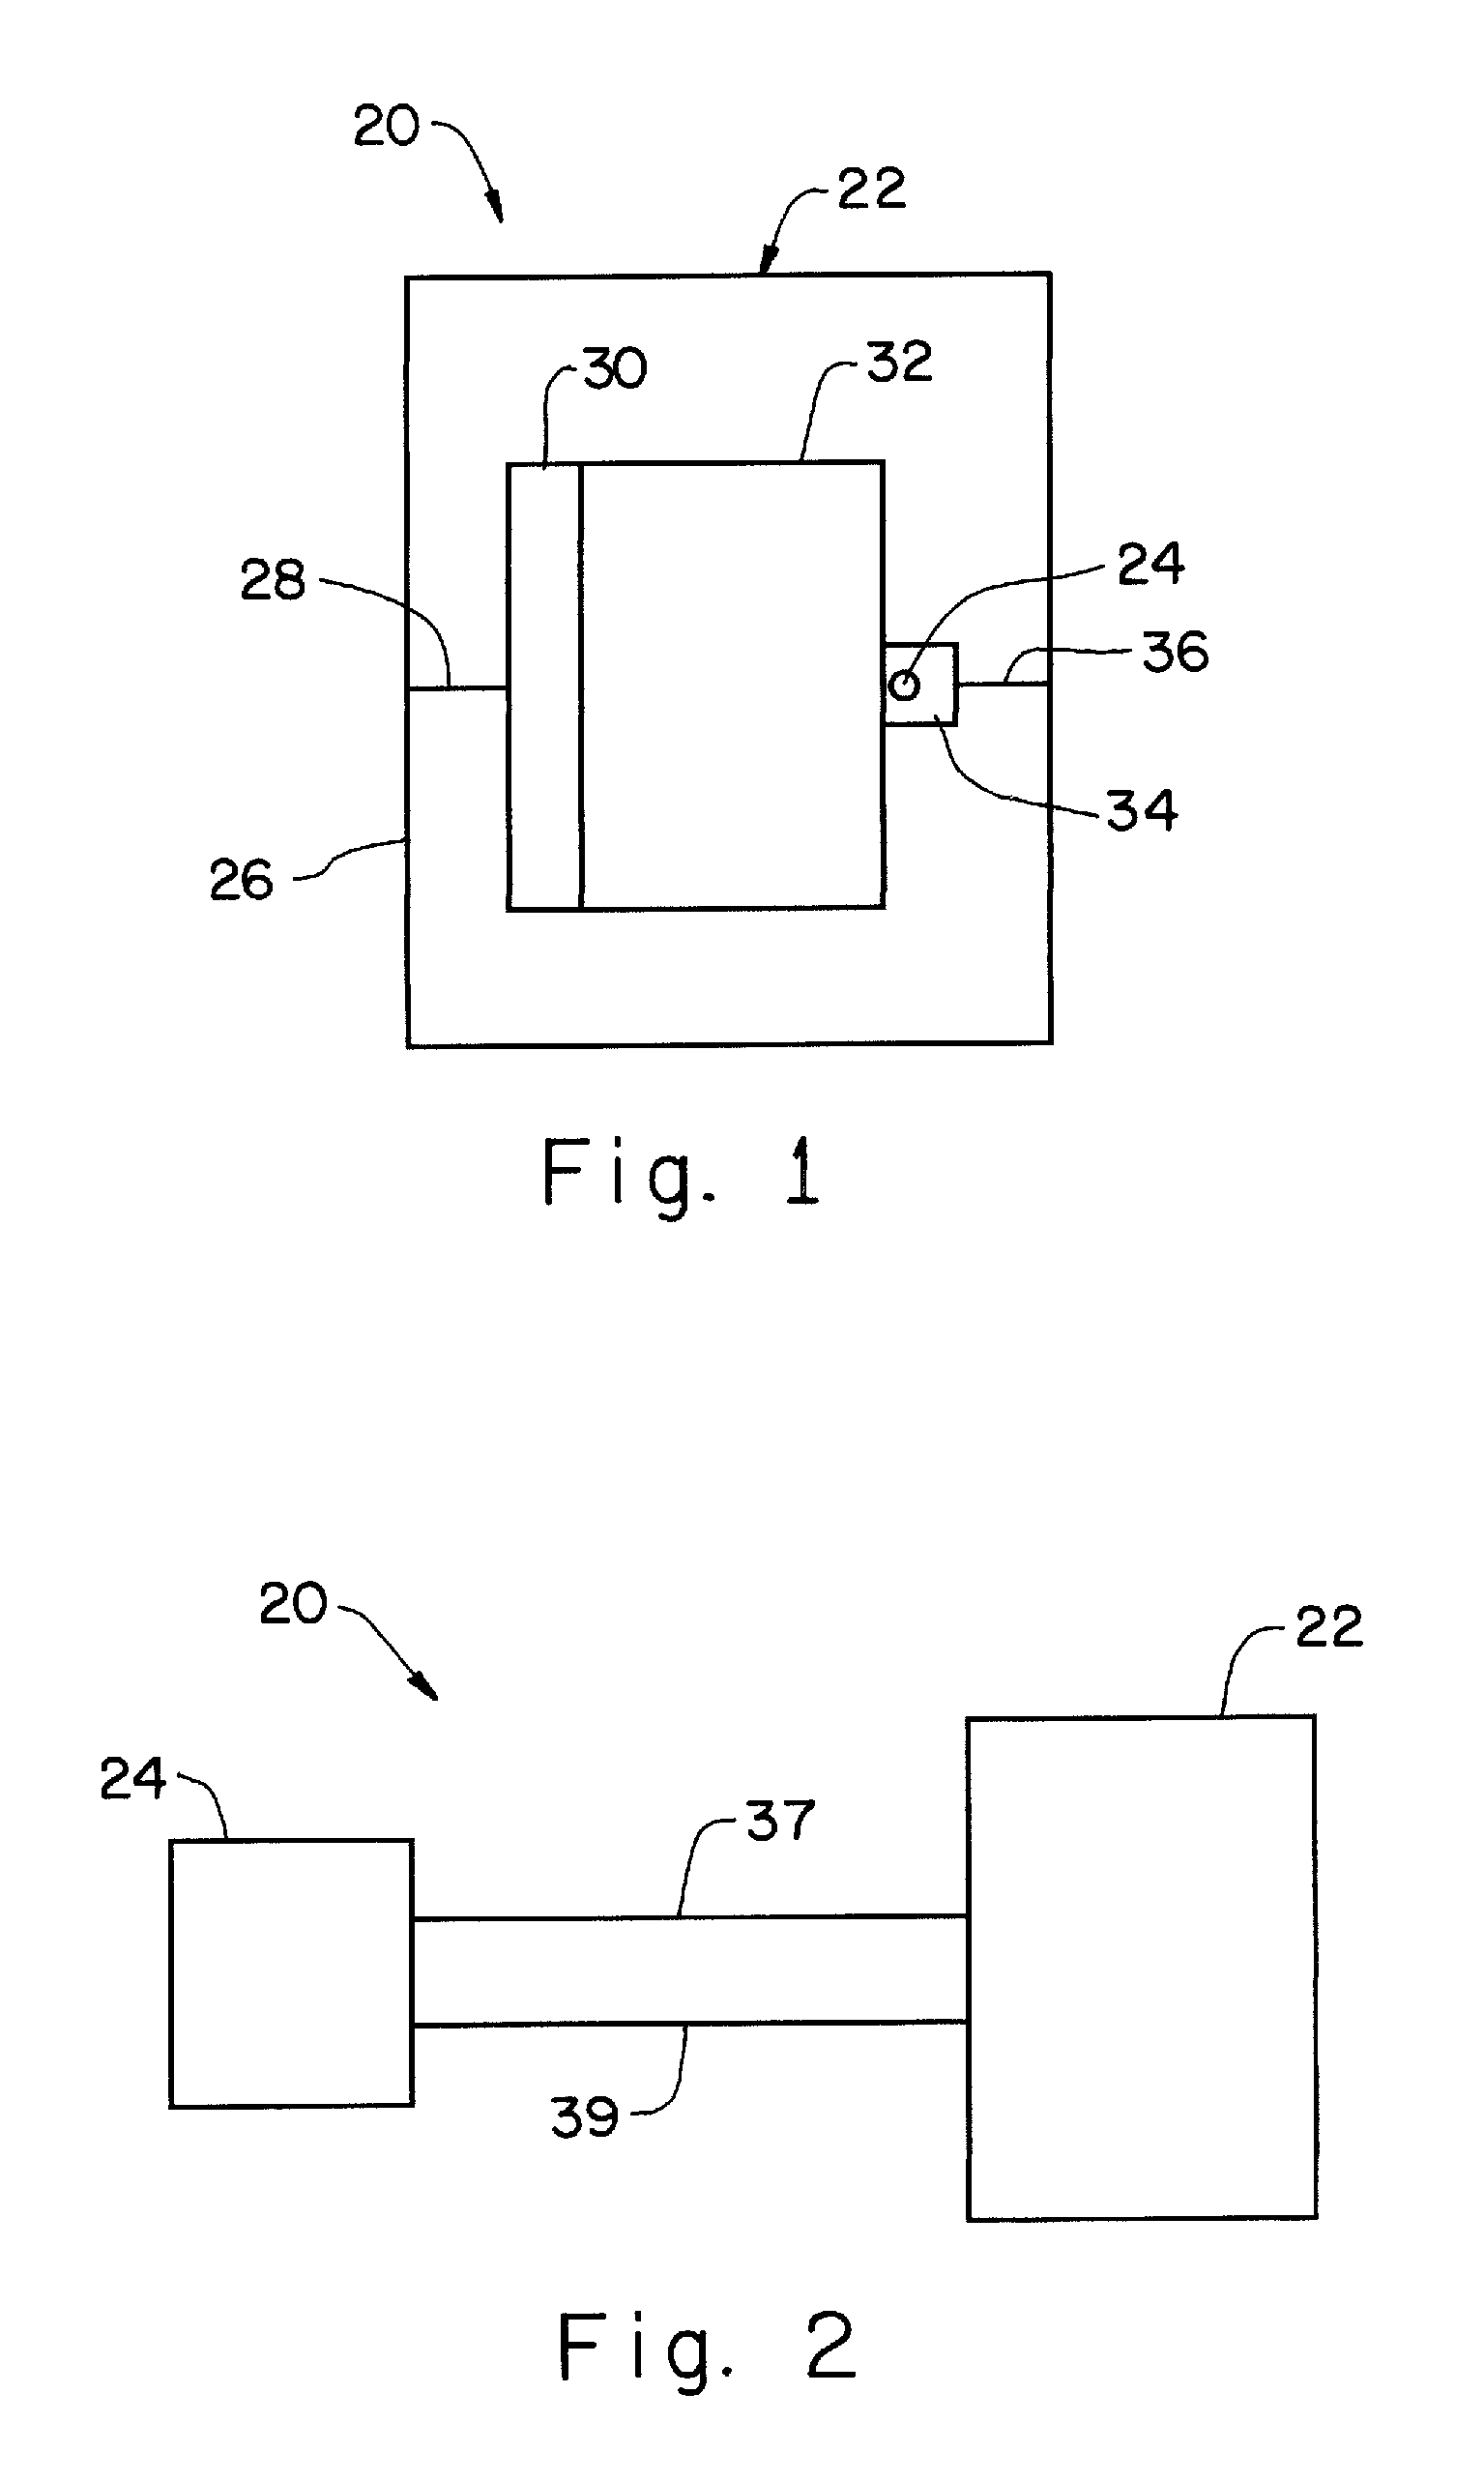 Appliance assembly with thermal fuse and temperature sensing device assembly